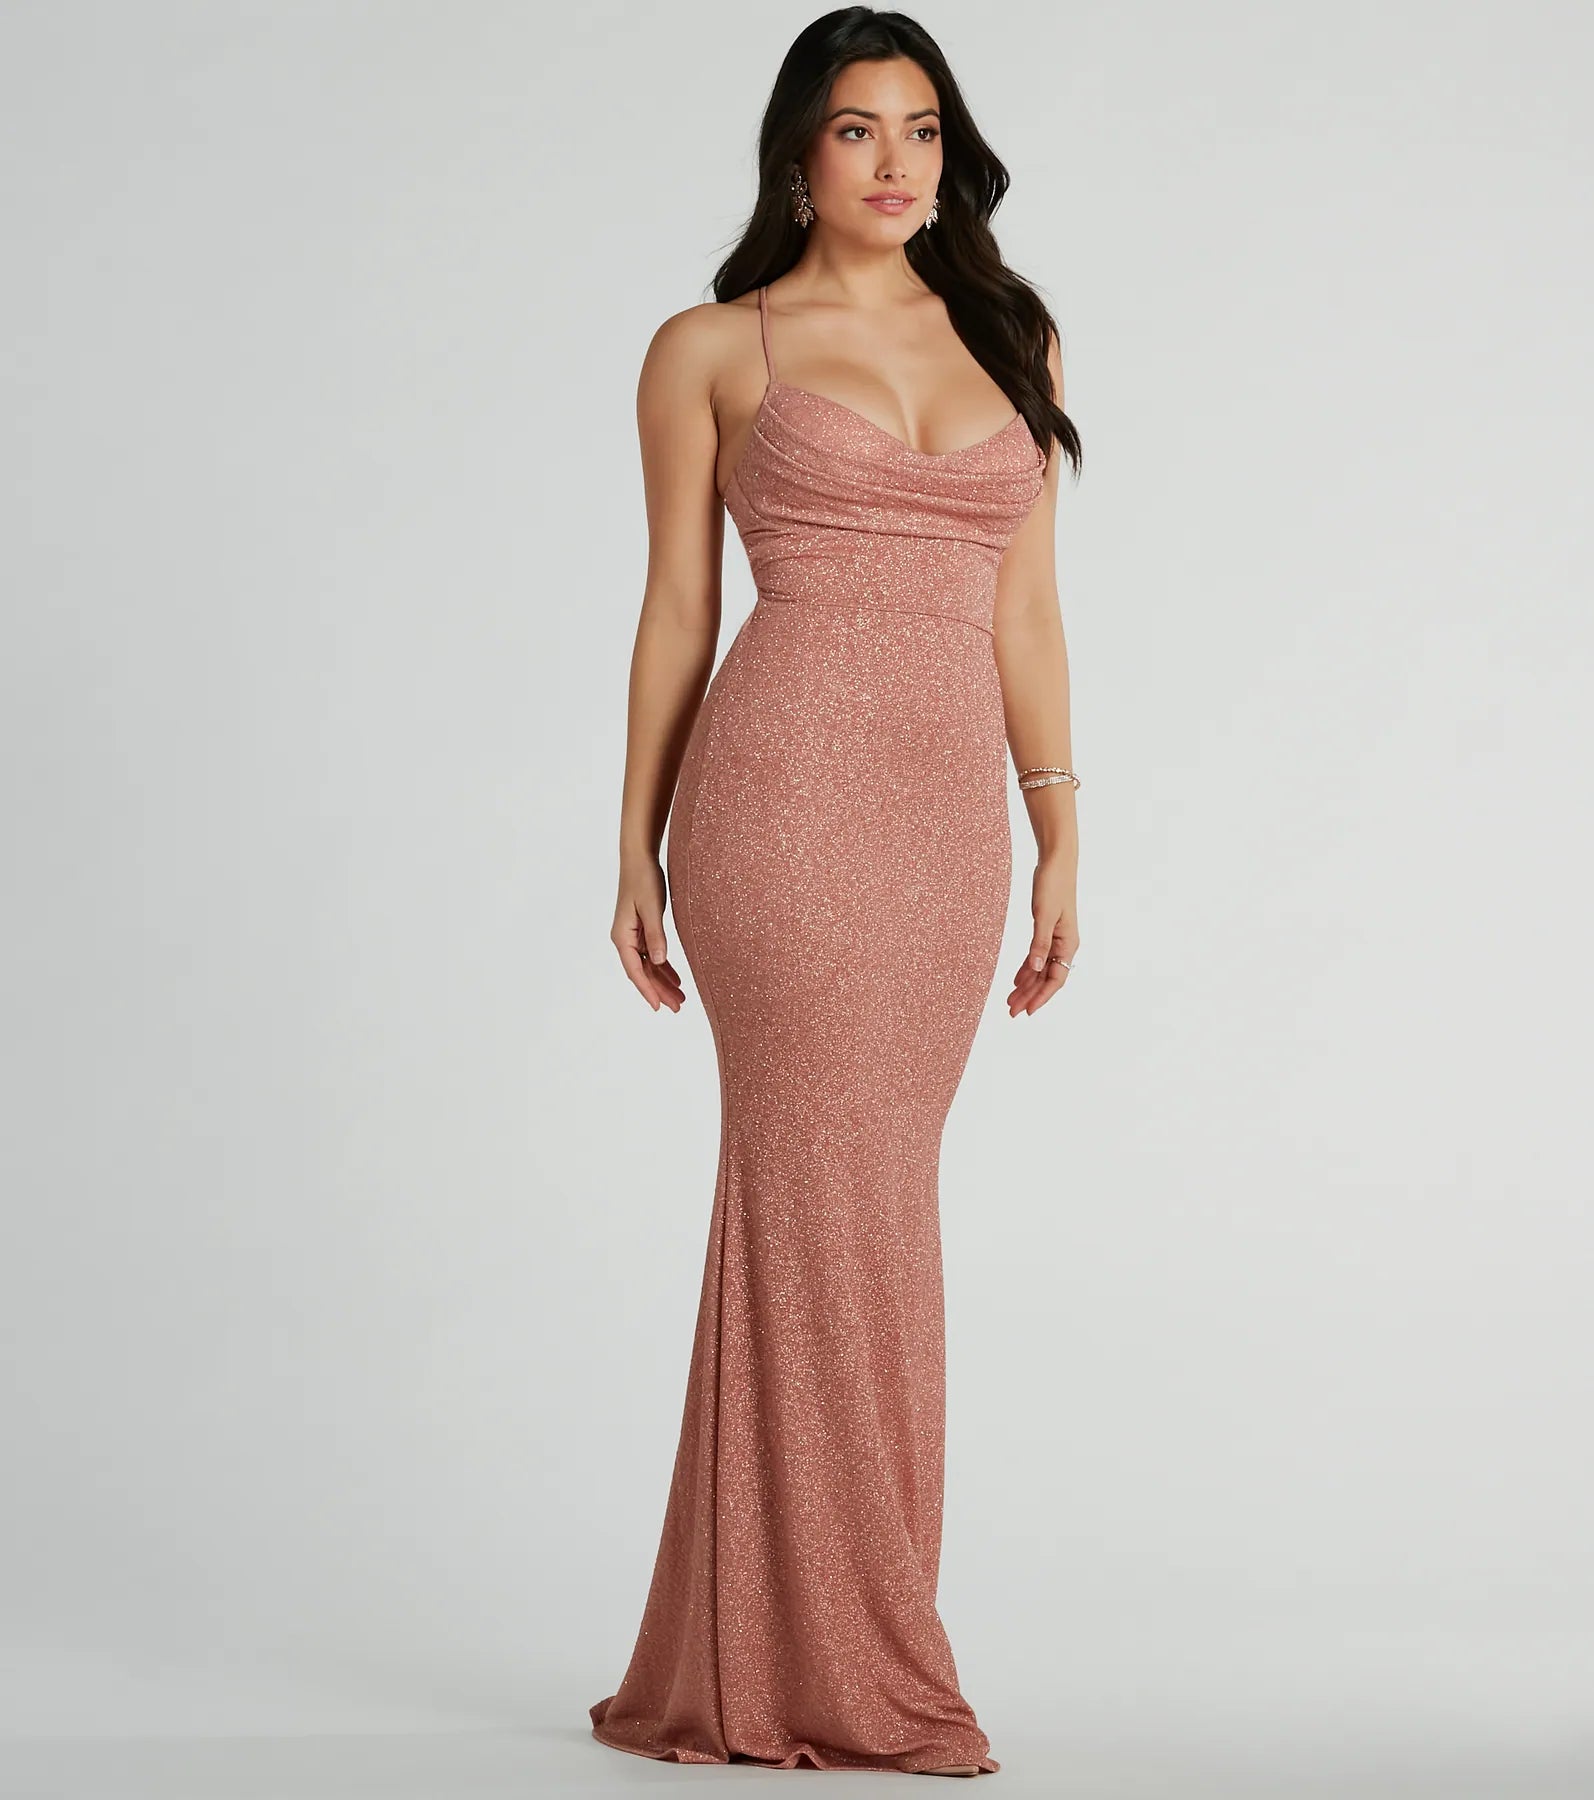 Sophisticated Mermaid Cowl Neck Spaghetti Strap Floor Length Lace-Up Glittering Stretchy Knit Prom Dress/Party Dress